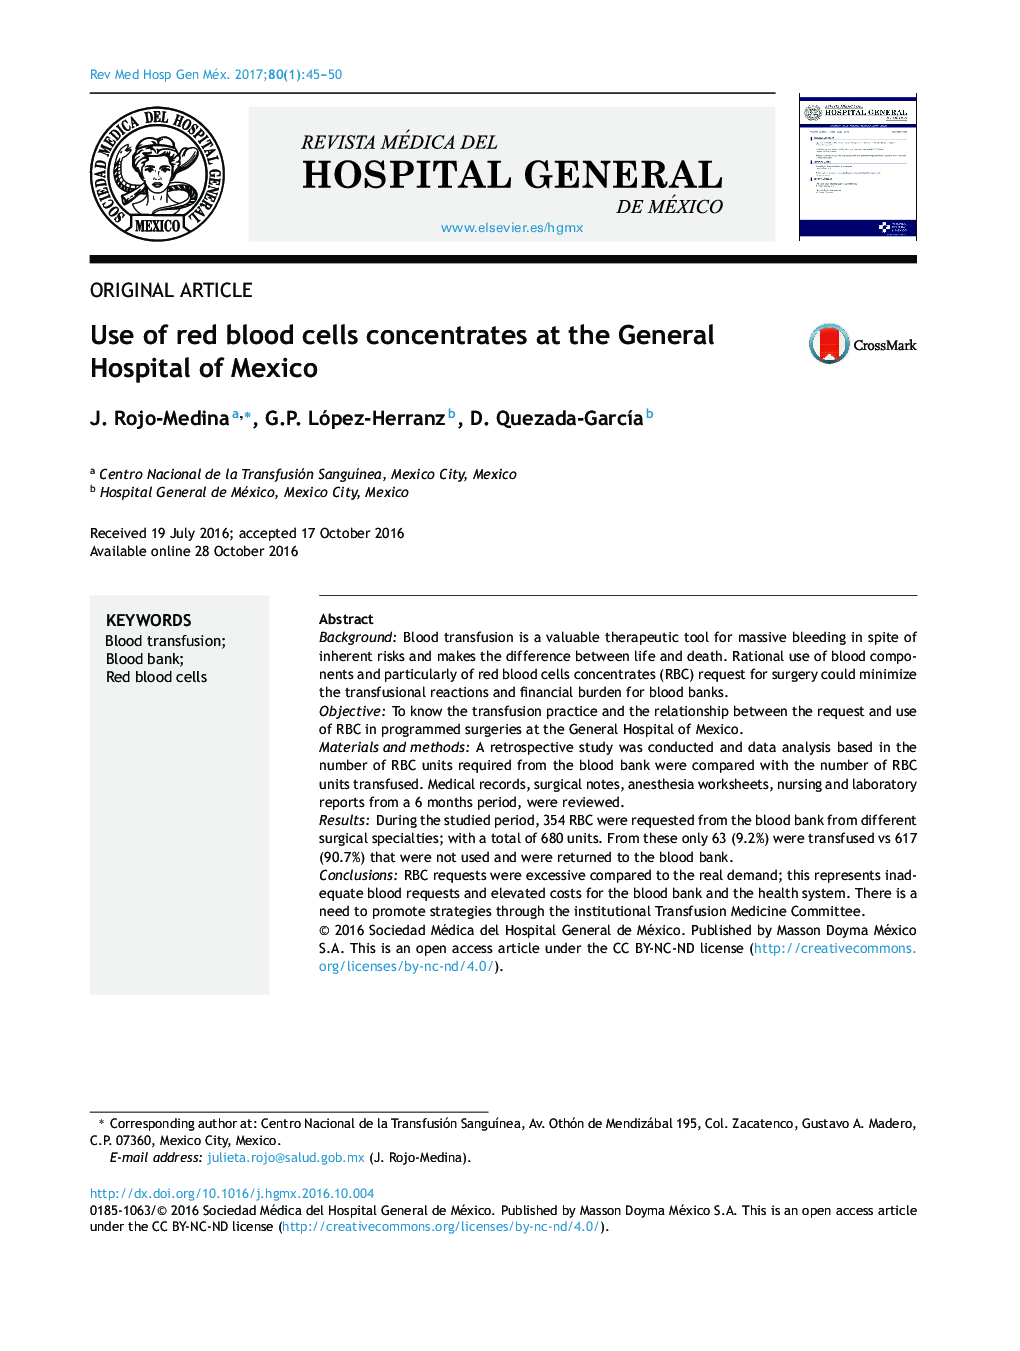 Use of red blood cells concentrates at the General Hospital of Mexico